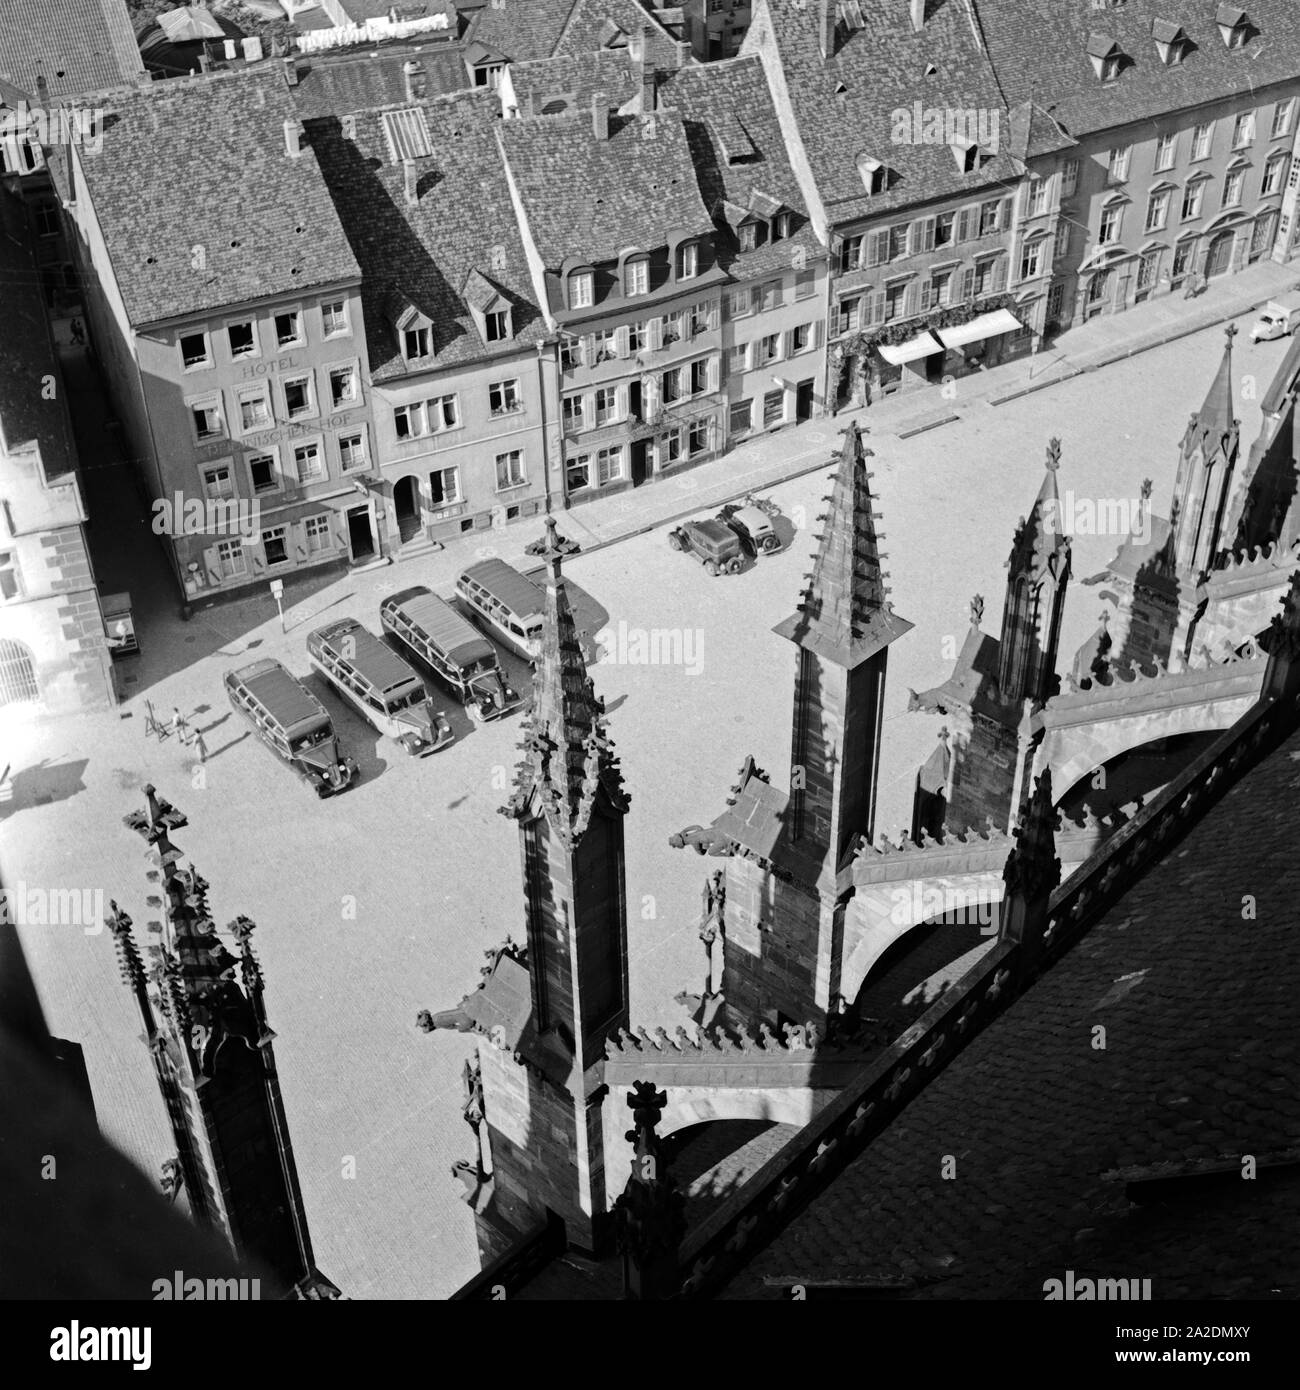 Blick vom Turm des Münsters in Freiburg auf die Stadt und Reisebusse, Deutschland 1930er Jahre, View from the belfry of the minster at Freiburg to the roofs of the city and coaches, Germany 1930s. Stock Photo